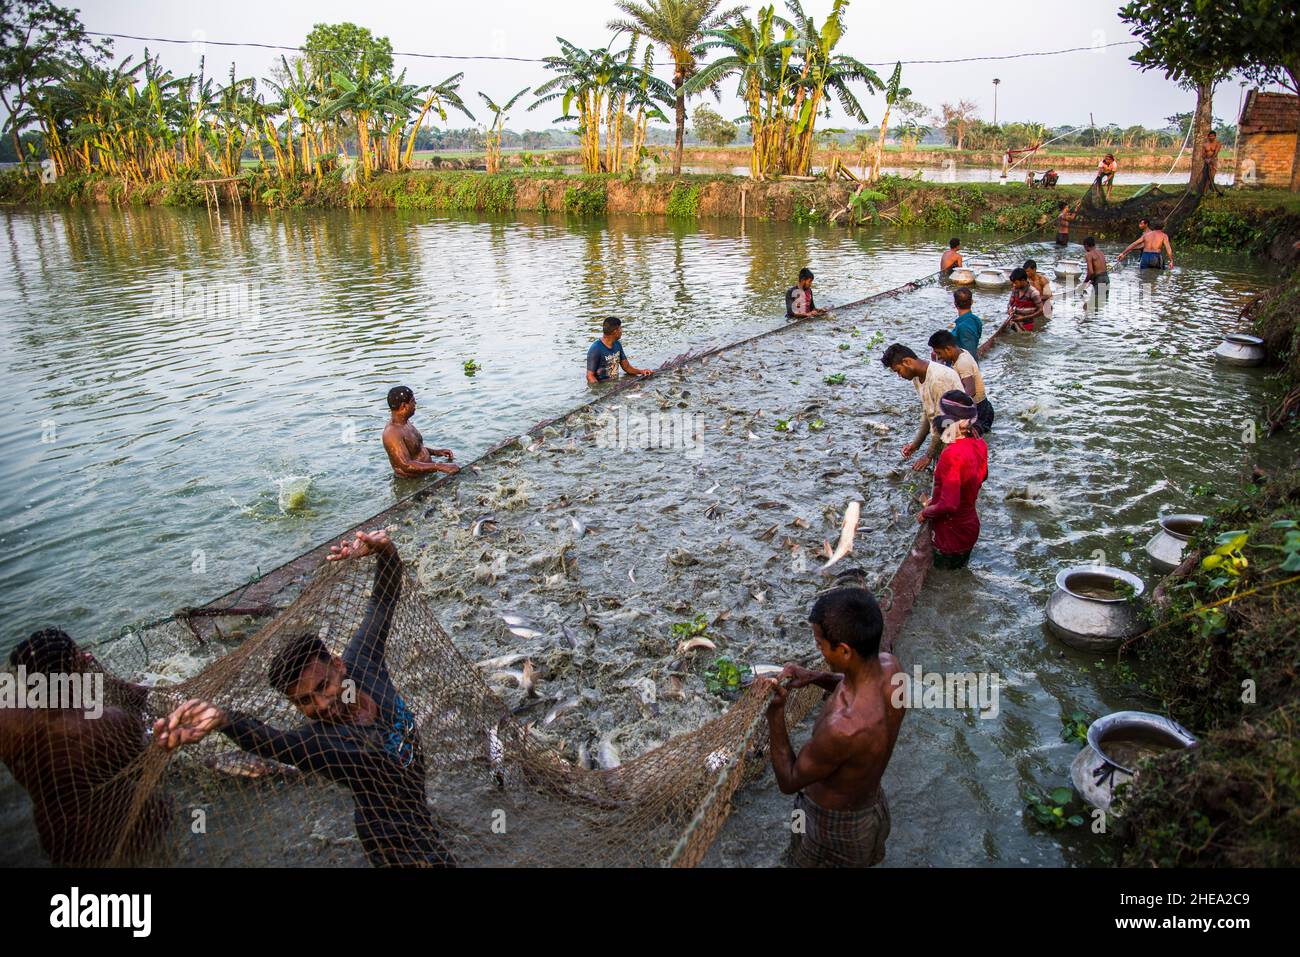 Fishers are harvesting pangas fish from a farm at Satkhira, Bangladesh. Pangas is one of the major cultured fish species which is popular for farming. Stock Photo